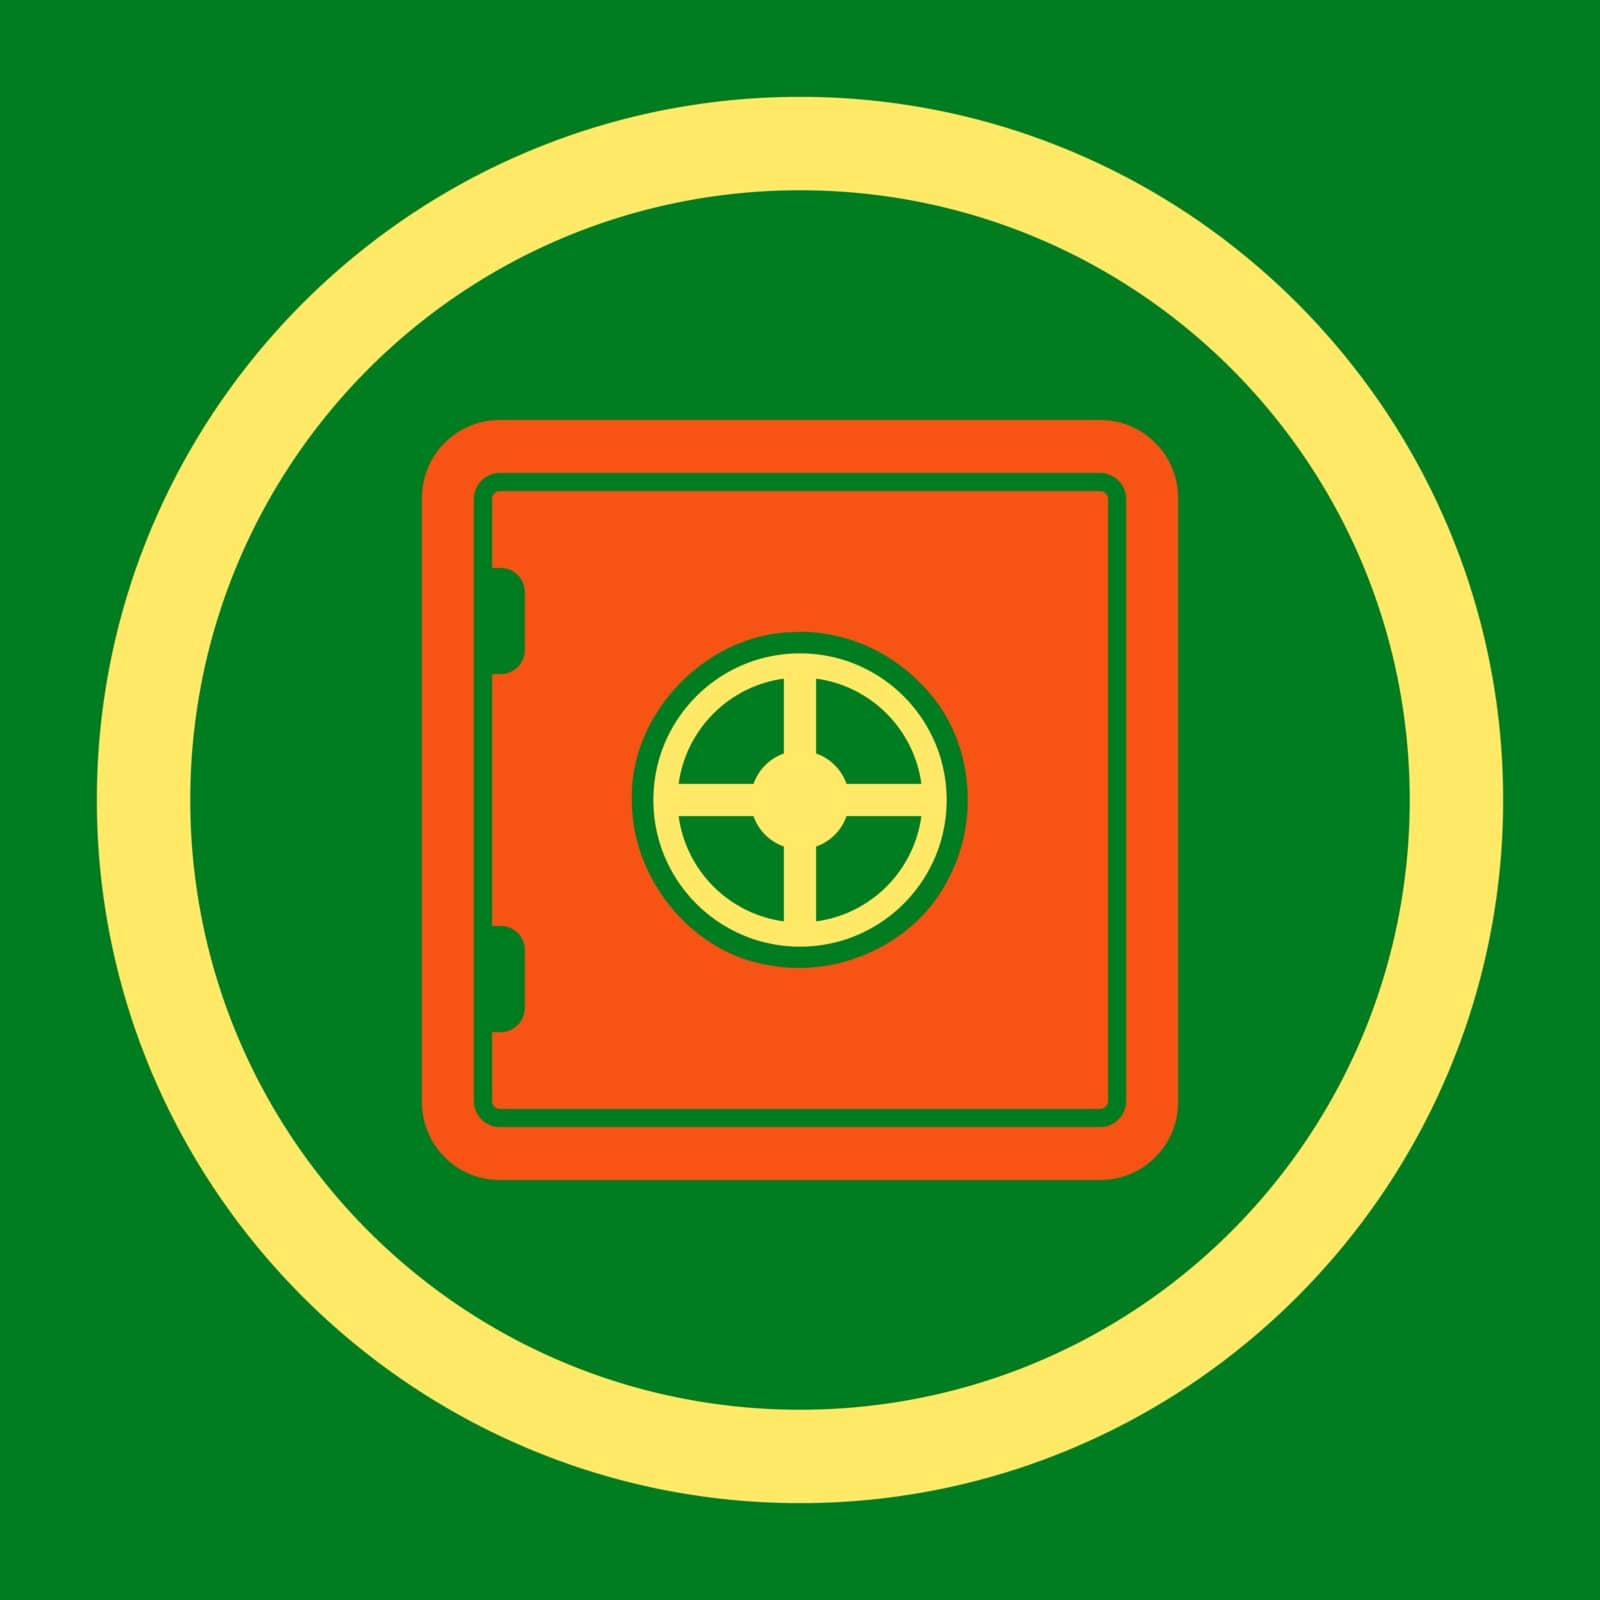 Safe vector icon. This flat rounded symbol uses orange and yellow colors and isolated on a green background.